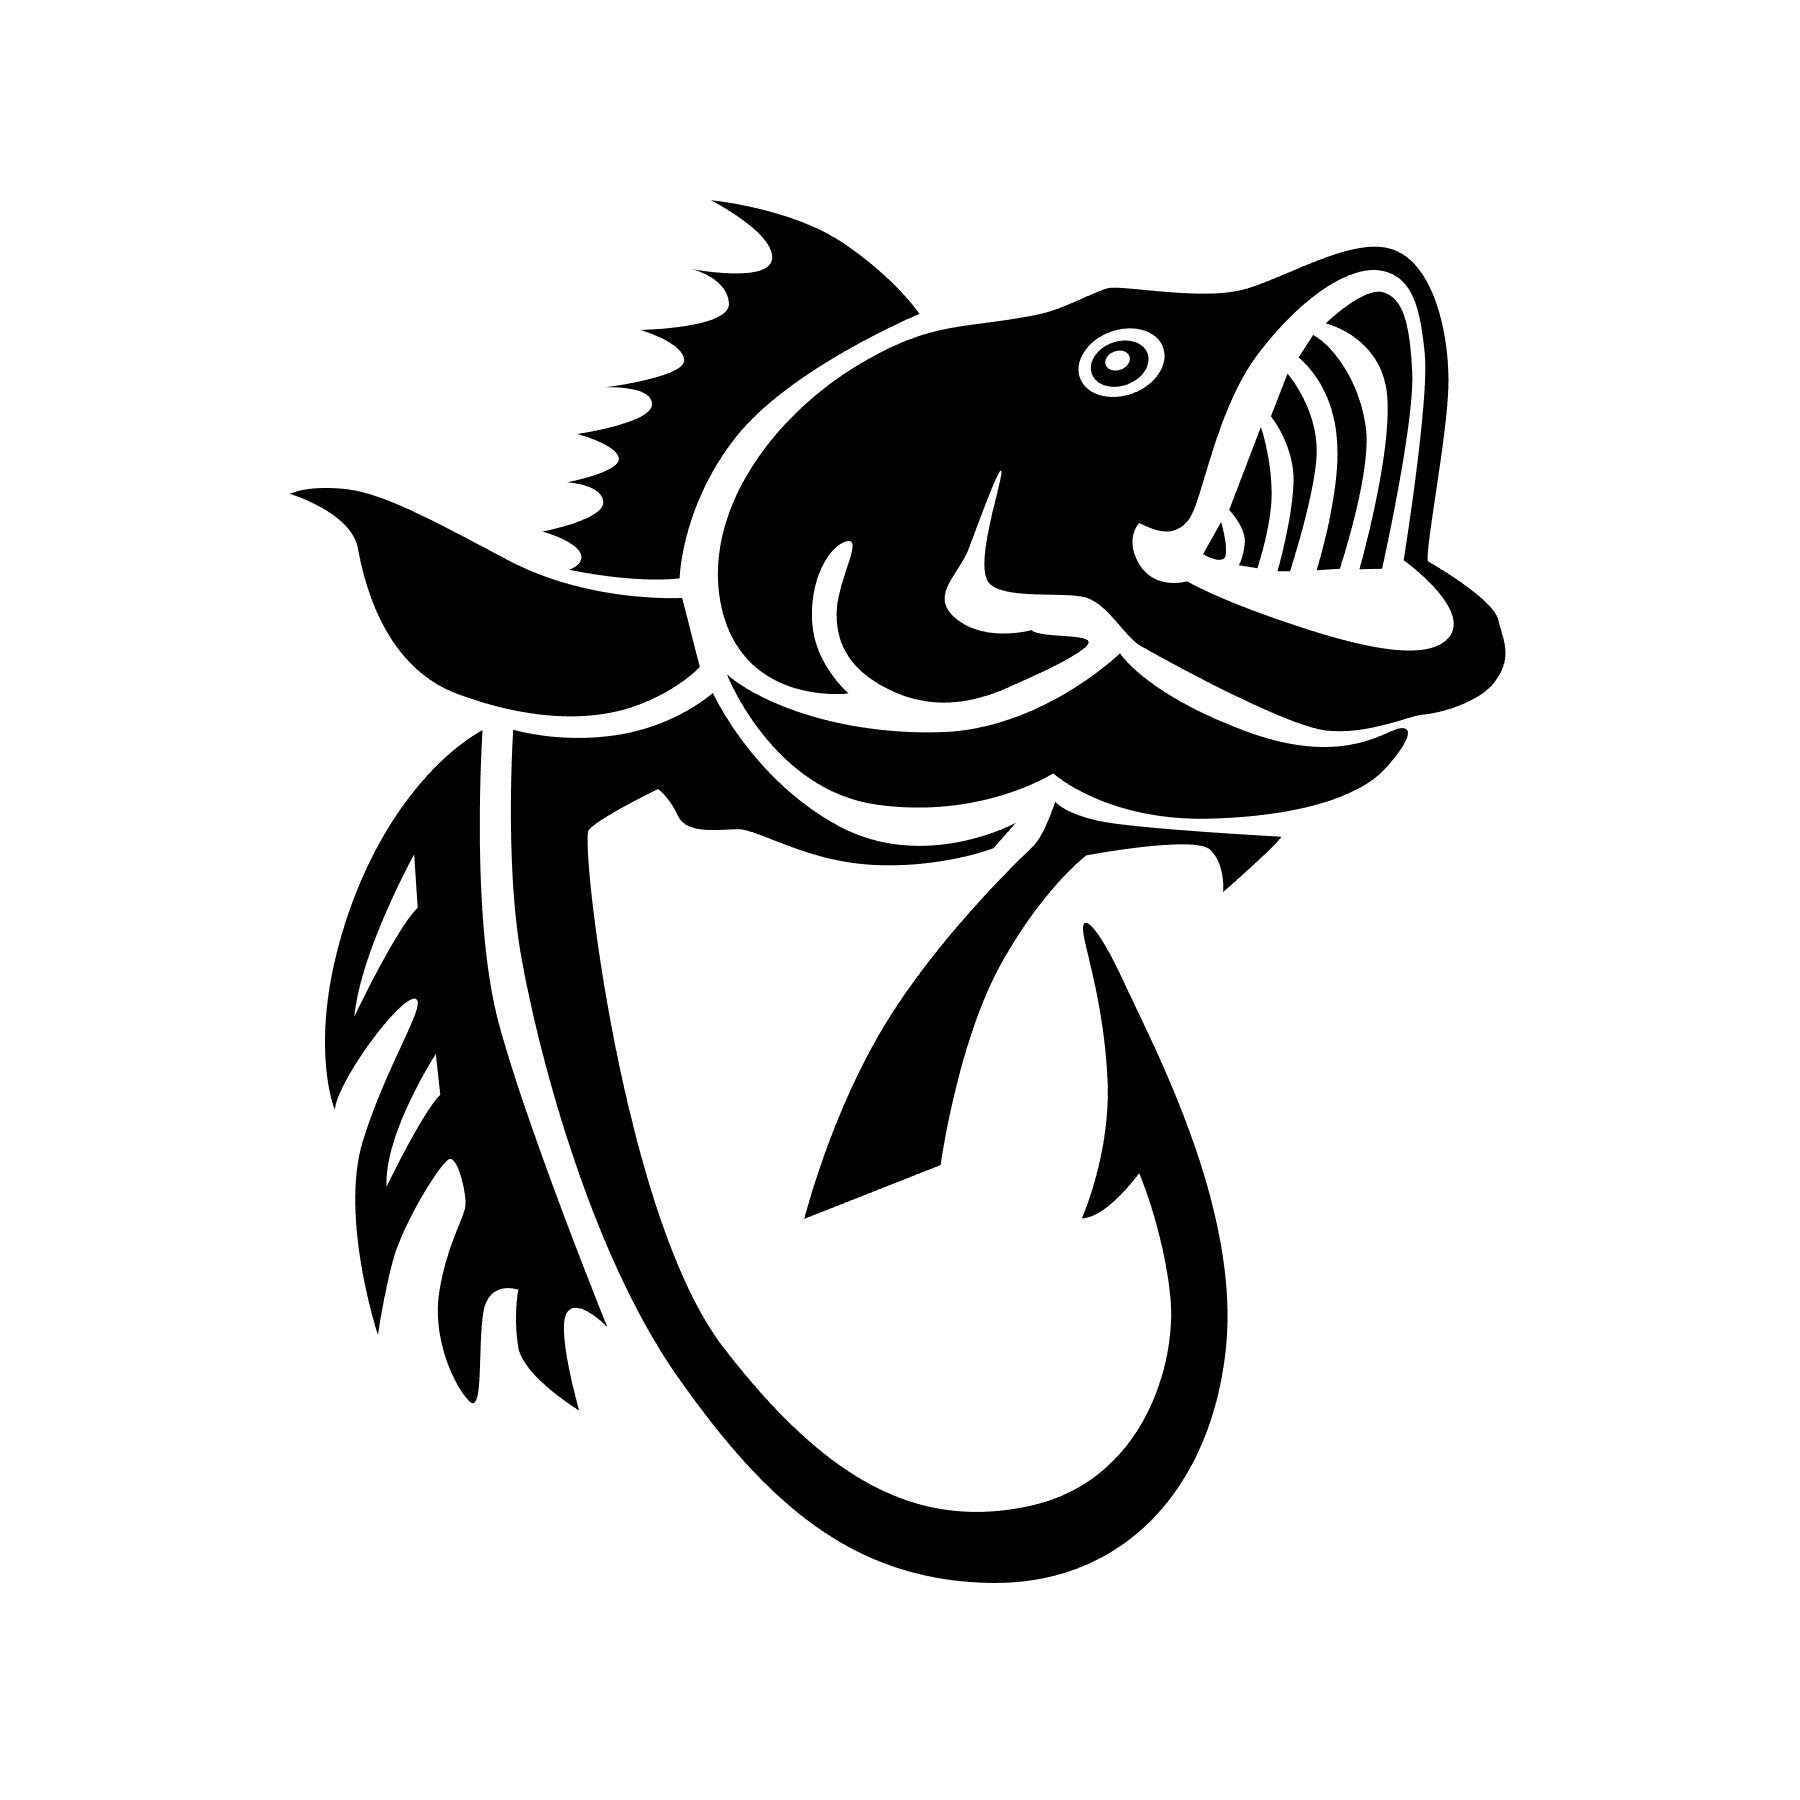 Large Fish Hook Decal Sticker for Husband Dad Father, Fathers Day Gift  Idea, Dad Mug Decal, Laptop, Truck Decal Sticker, Happy Fish -  Canada